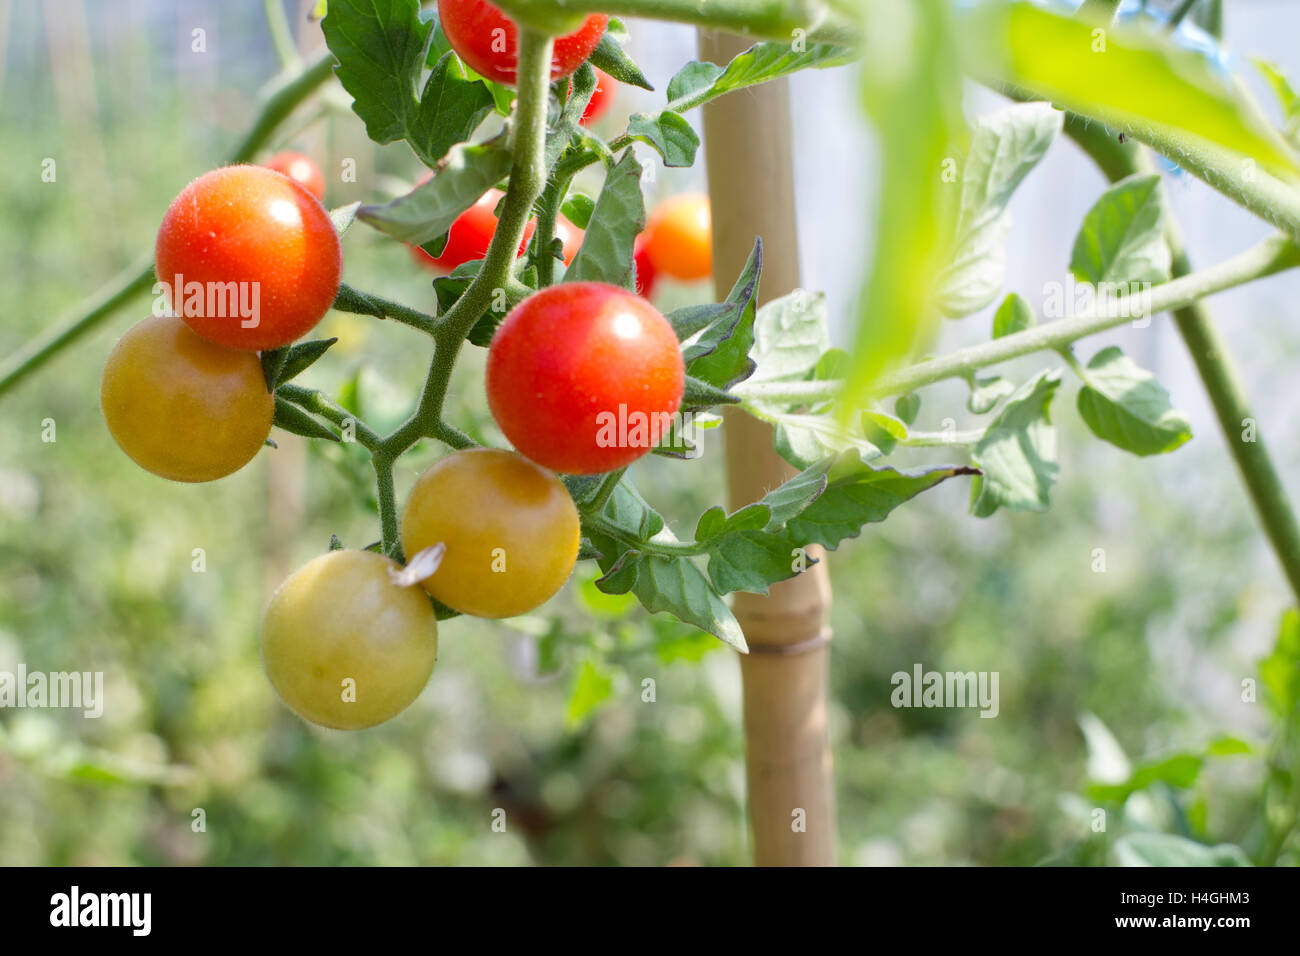 Cherry tomatoes, yellow and red on the vine, farm inspired Stock Photo